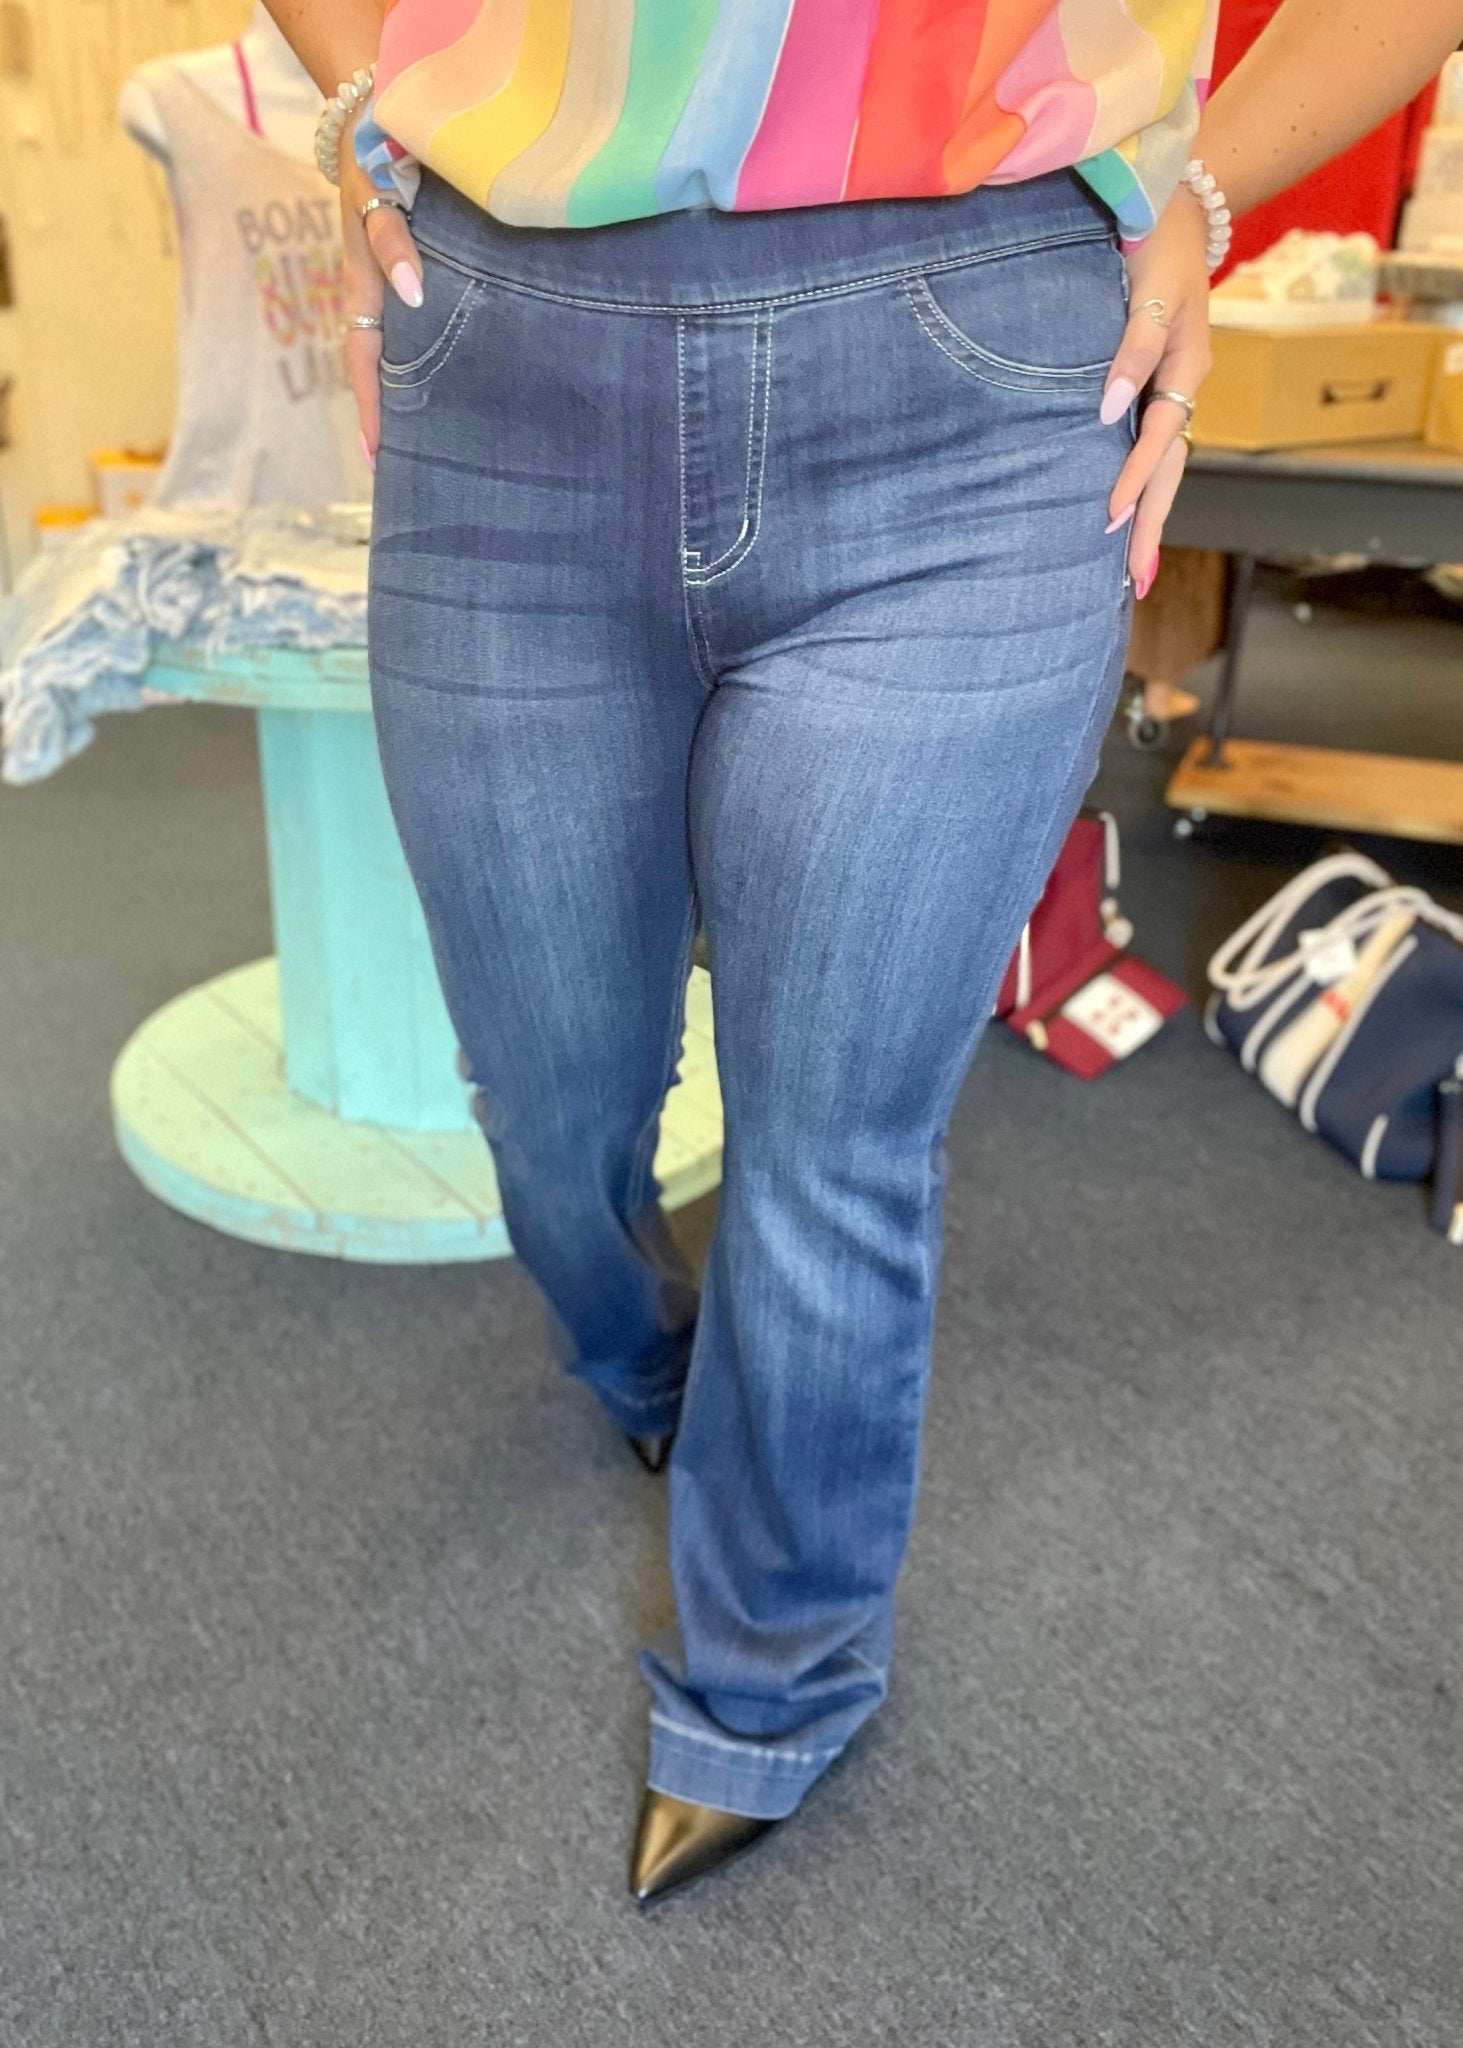 Cello Denim Flare Jeans - Medium Wash - 30" Inseam (Curvy Too) - jeans -Jimberly's Boutique-Olive Branch-Mississippi